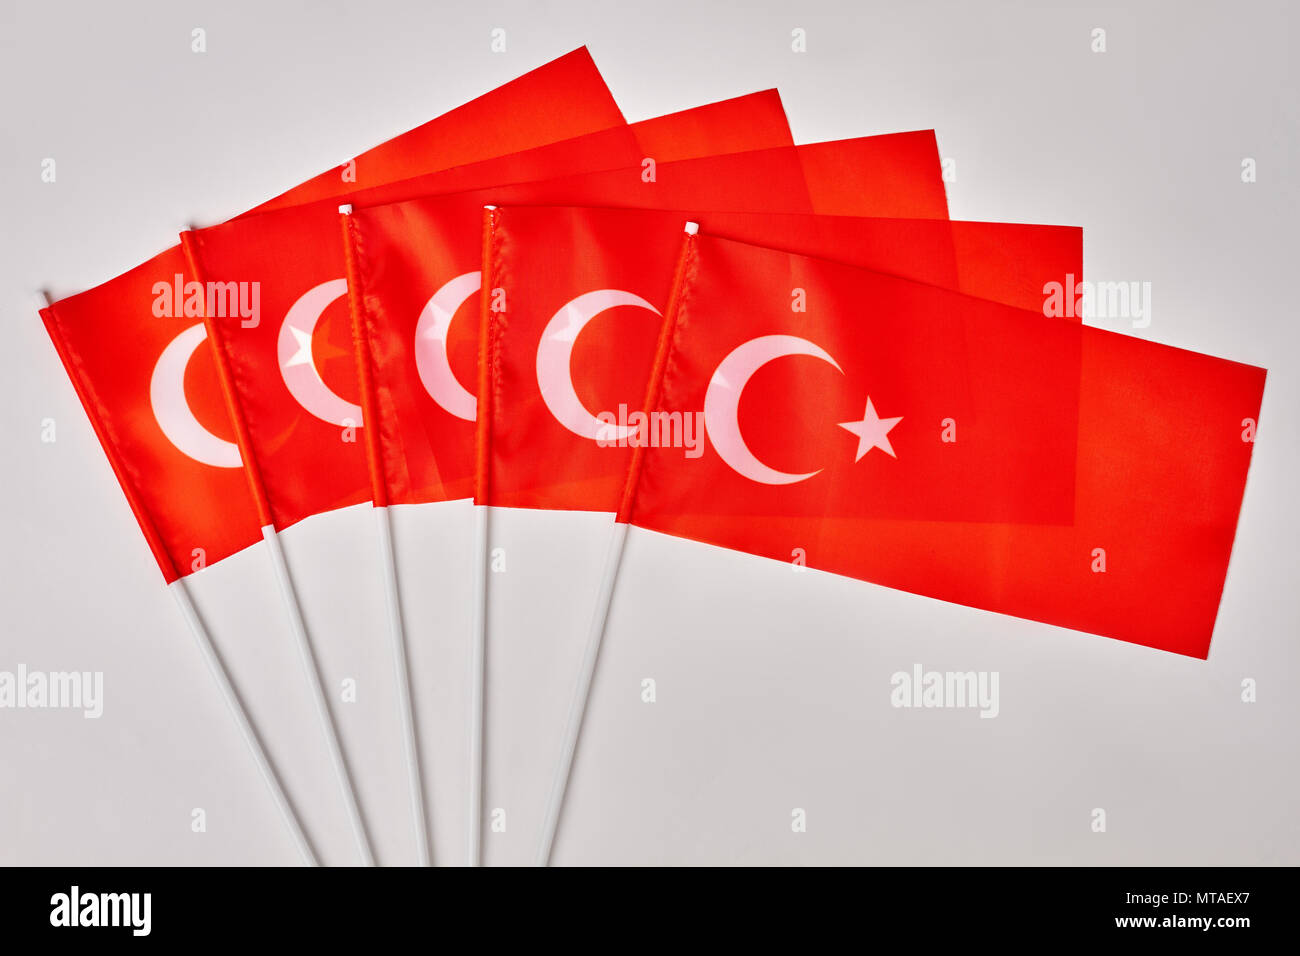 Collection of turkey flags. Turkish flags on white isolated background. Stock Photo